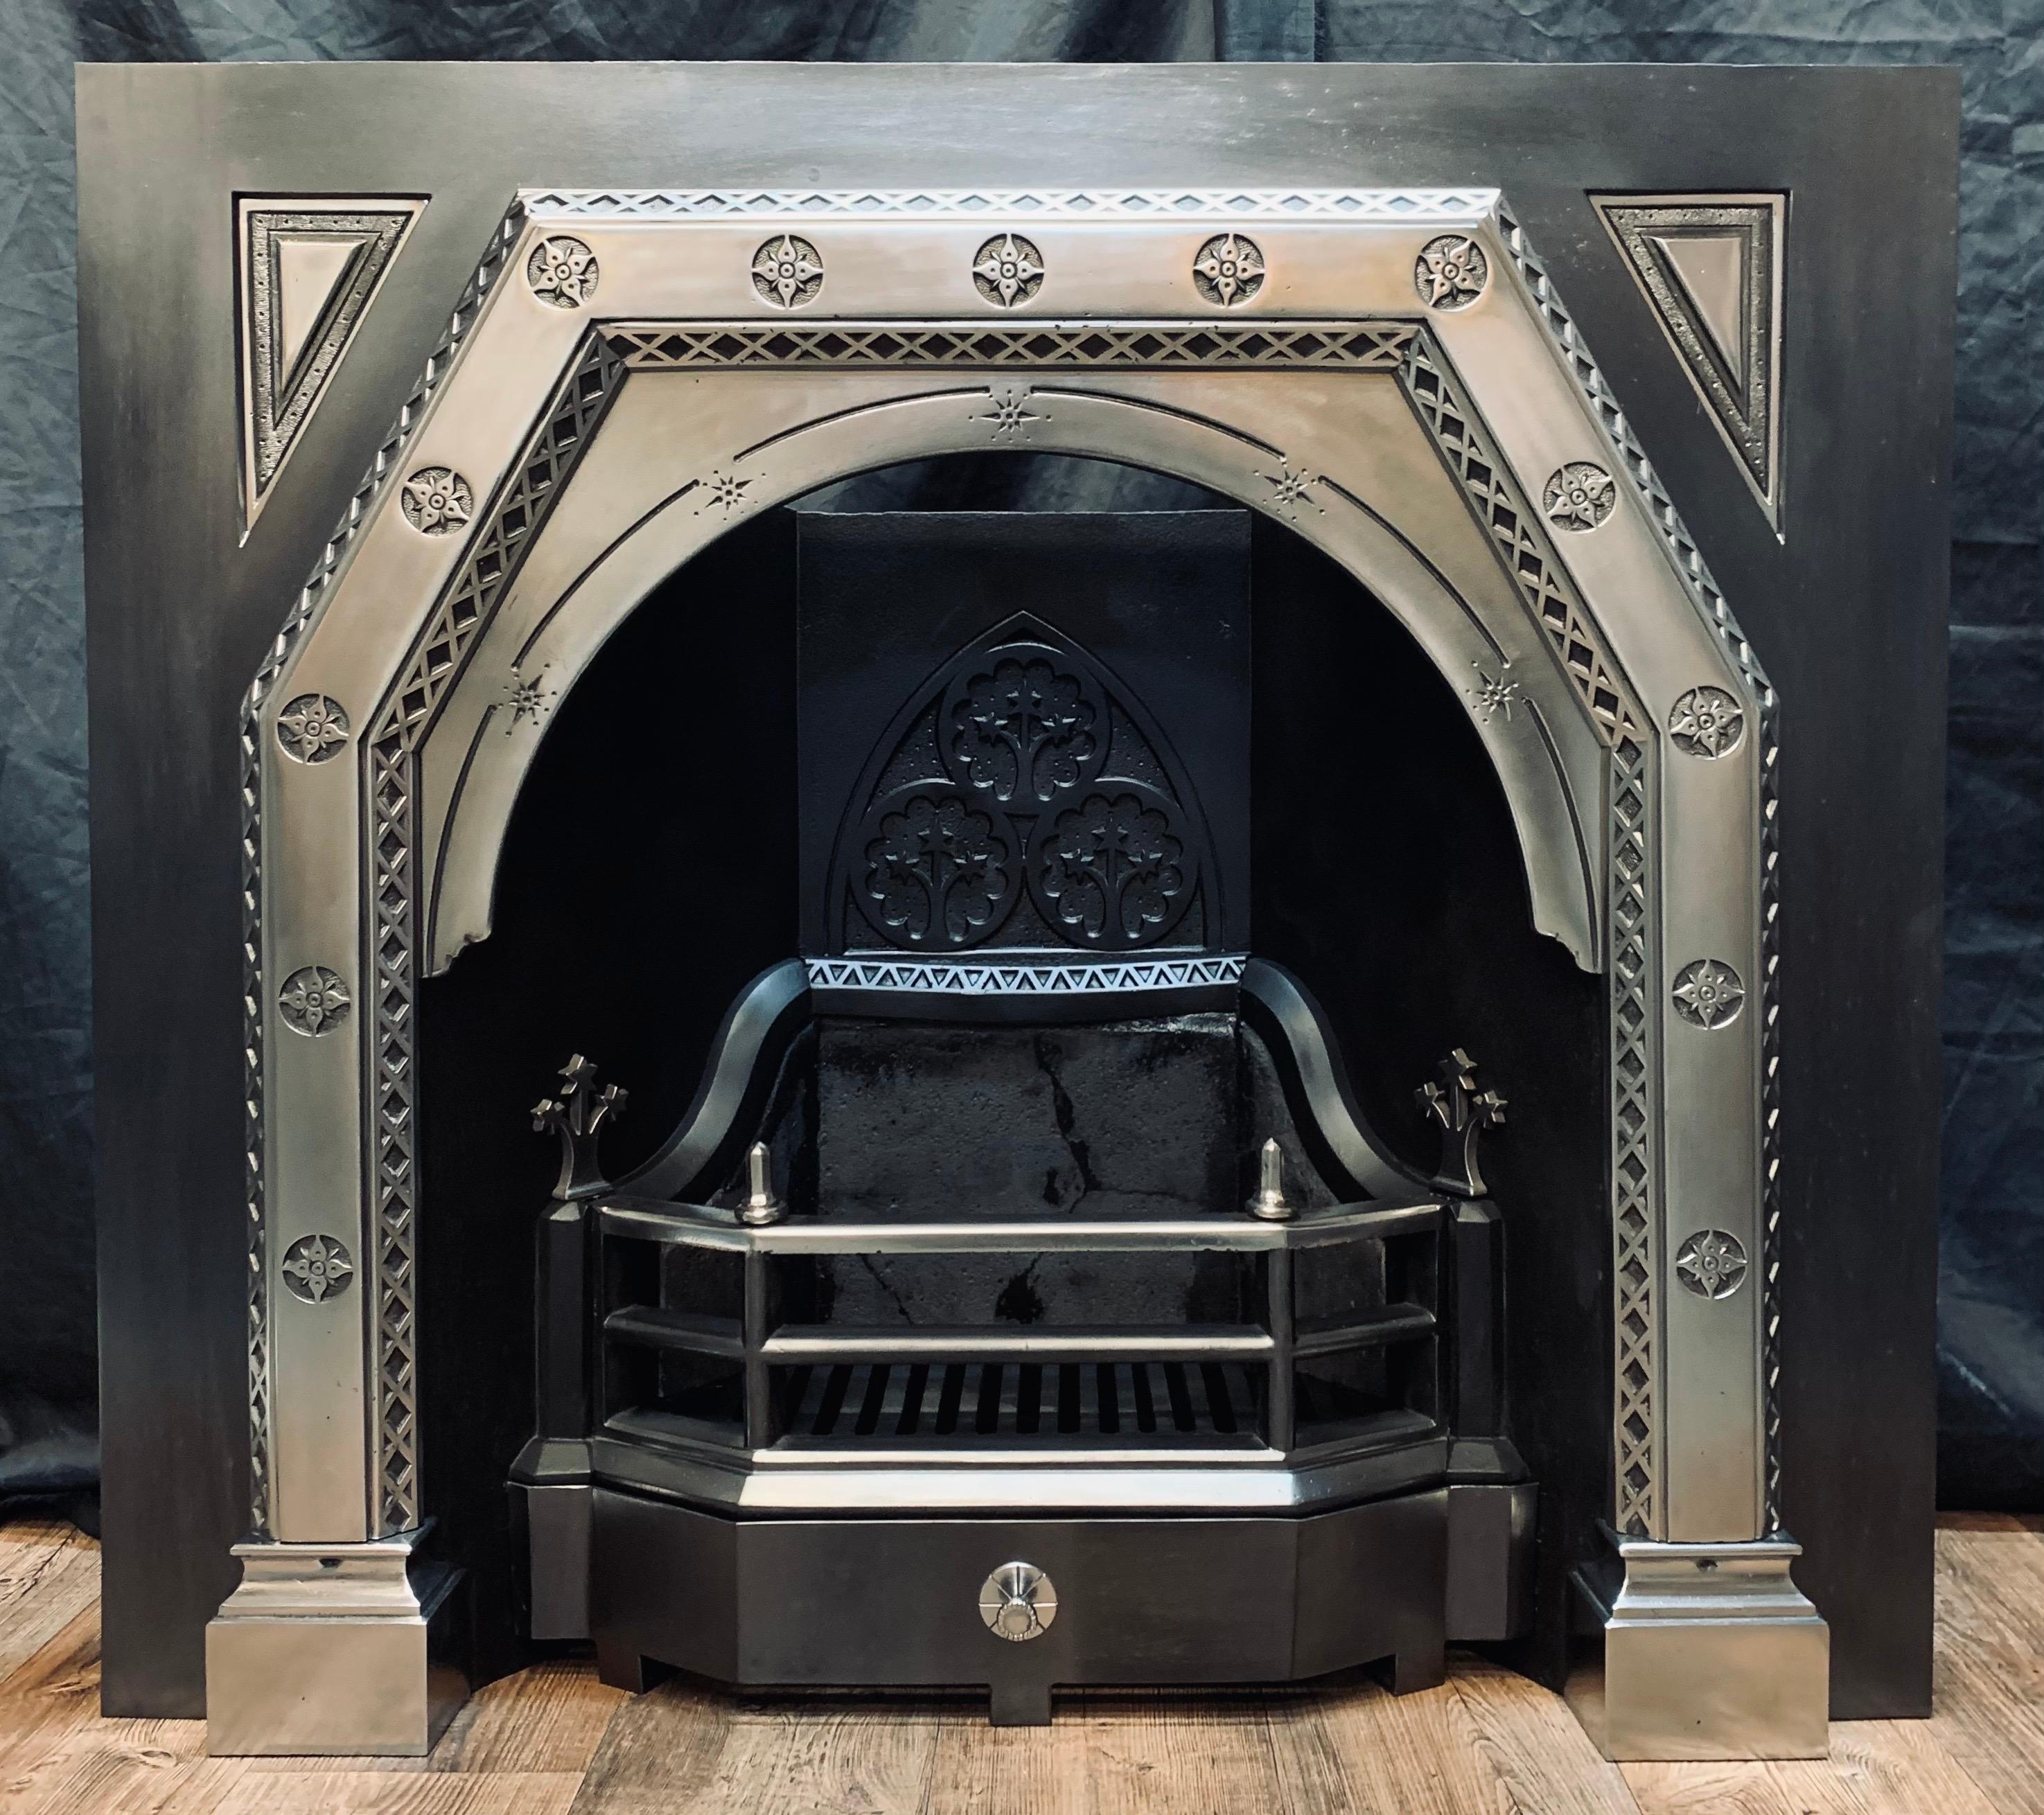 A large masculine and flamboyant example of a 19th century Scottish Aesthetic movement cast iron fireplace insert. A large outer plate with recessed fielded panels hosts an off set protruding polished front, with 13 cast daisies and repeating